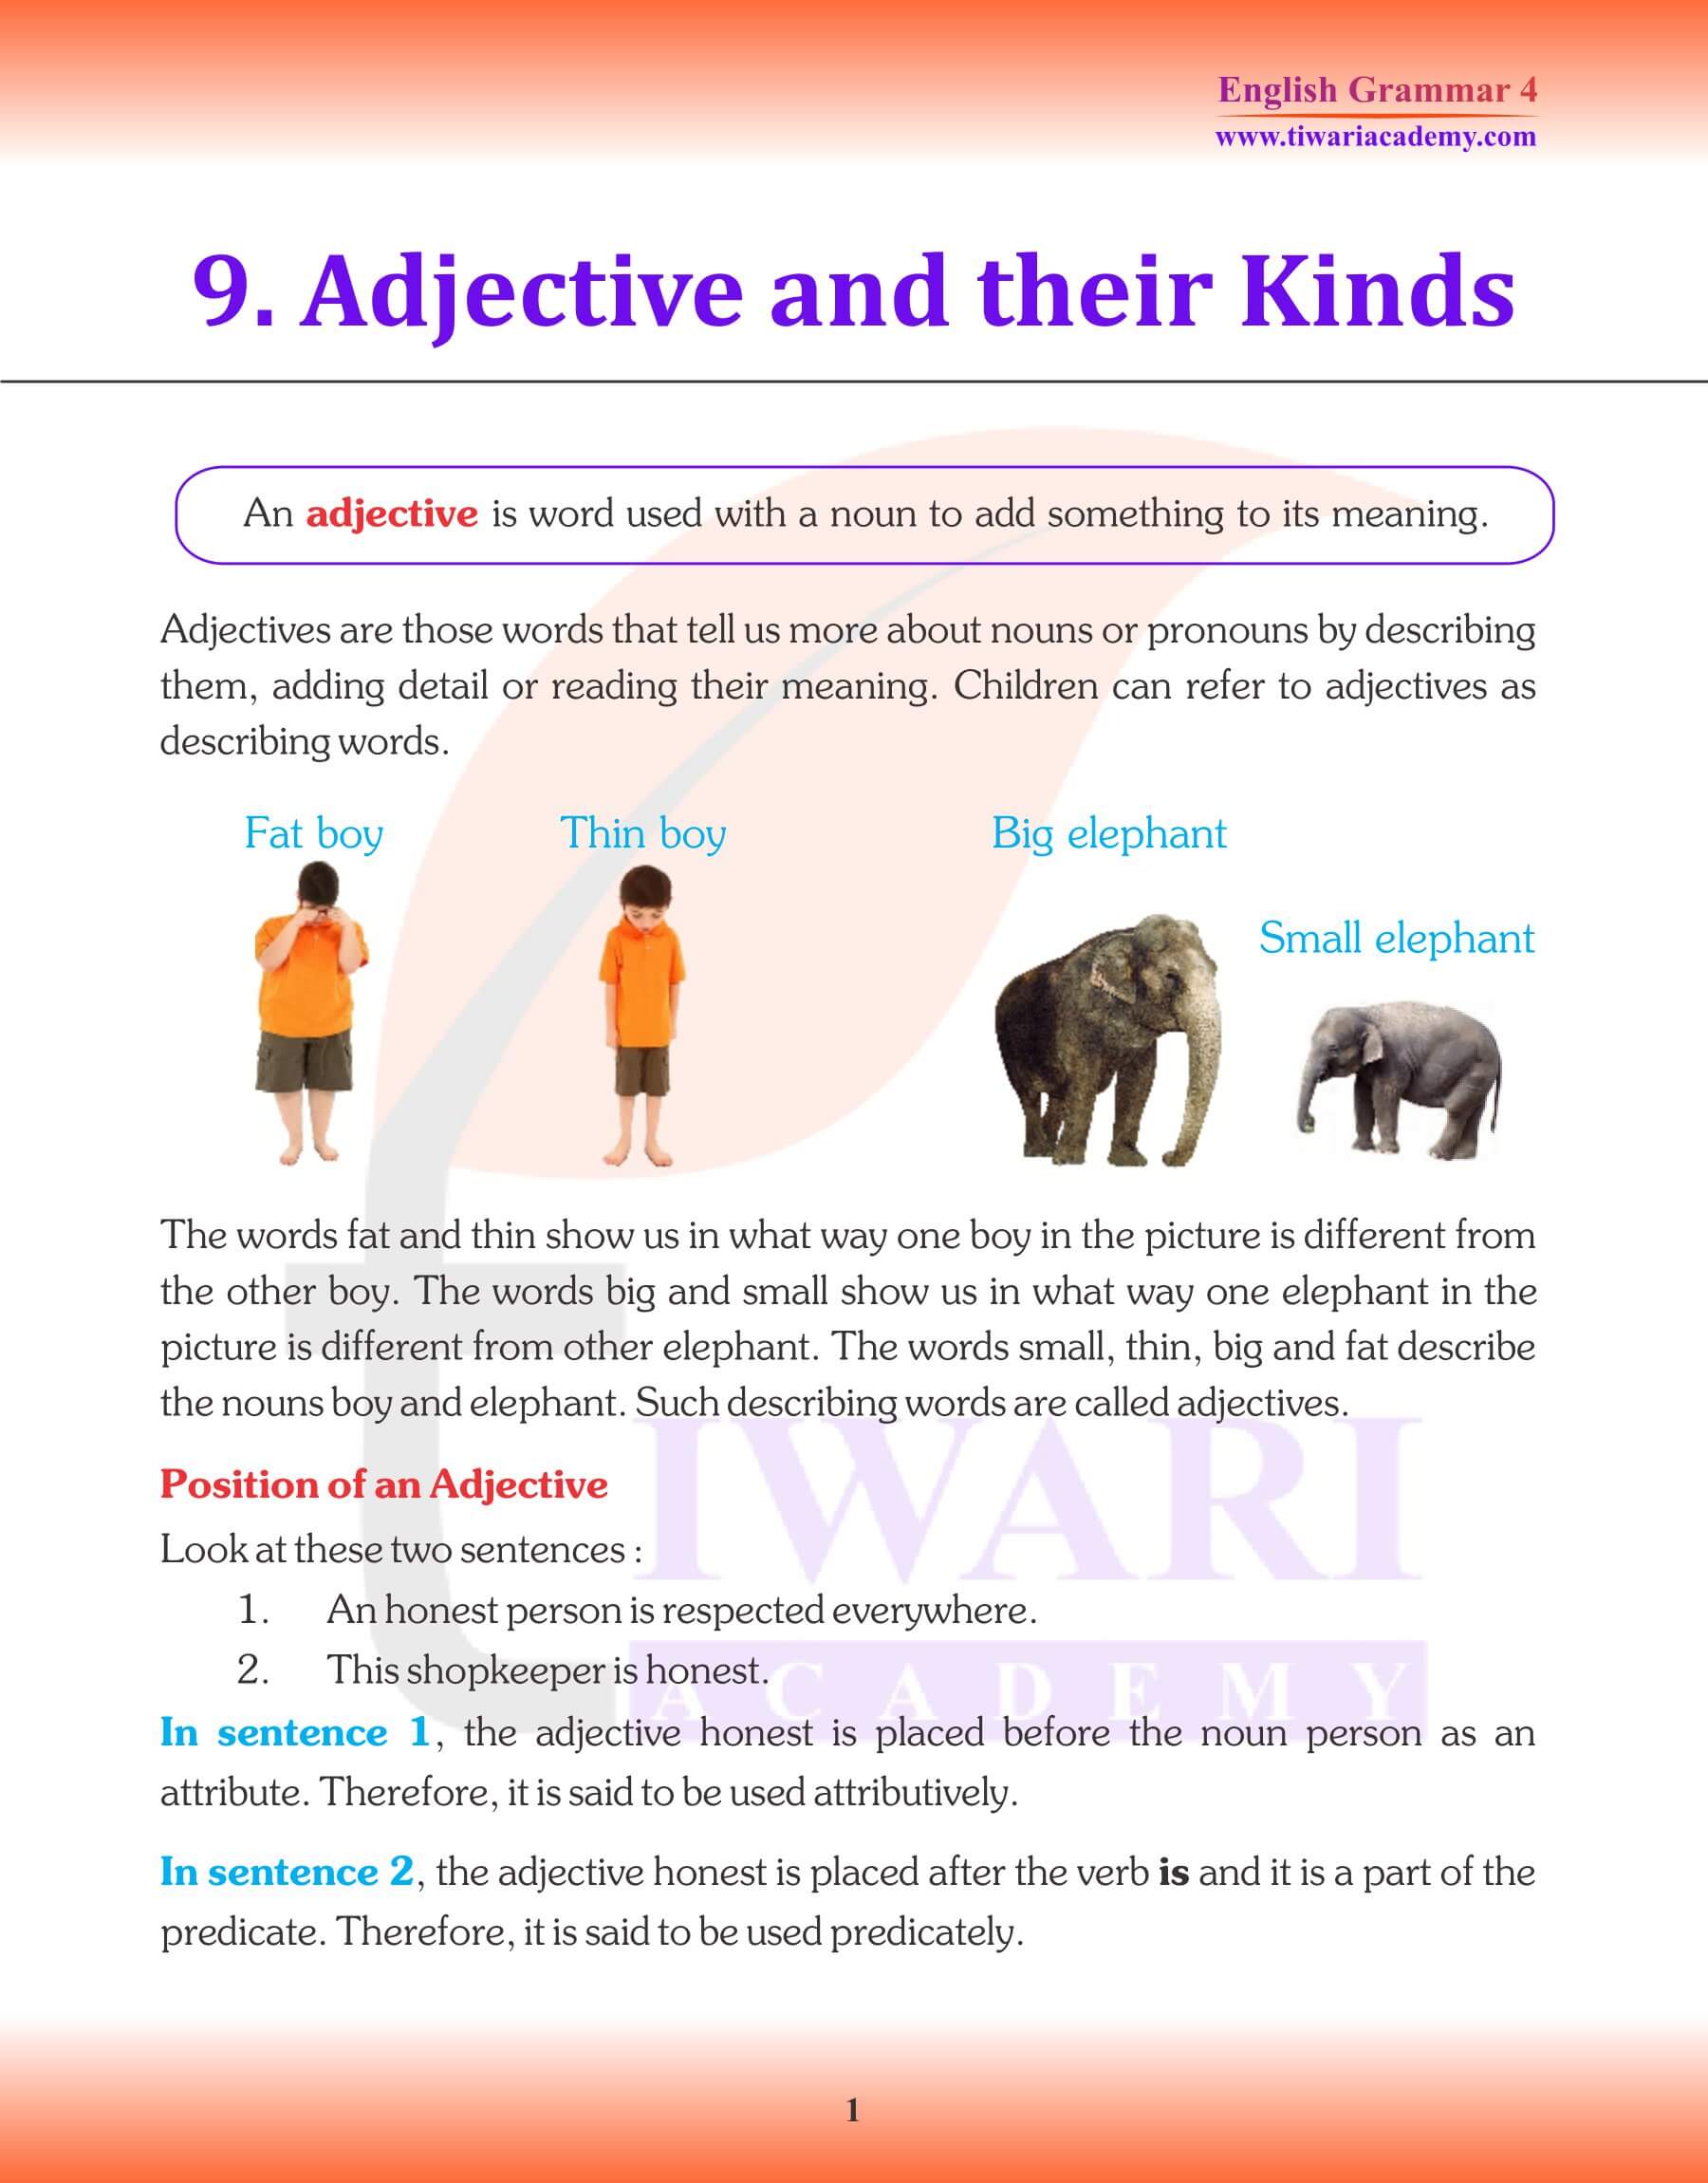 English Grammar Adjective and their Kinds